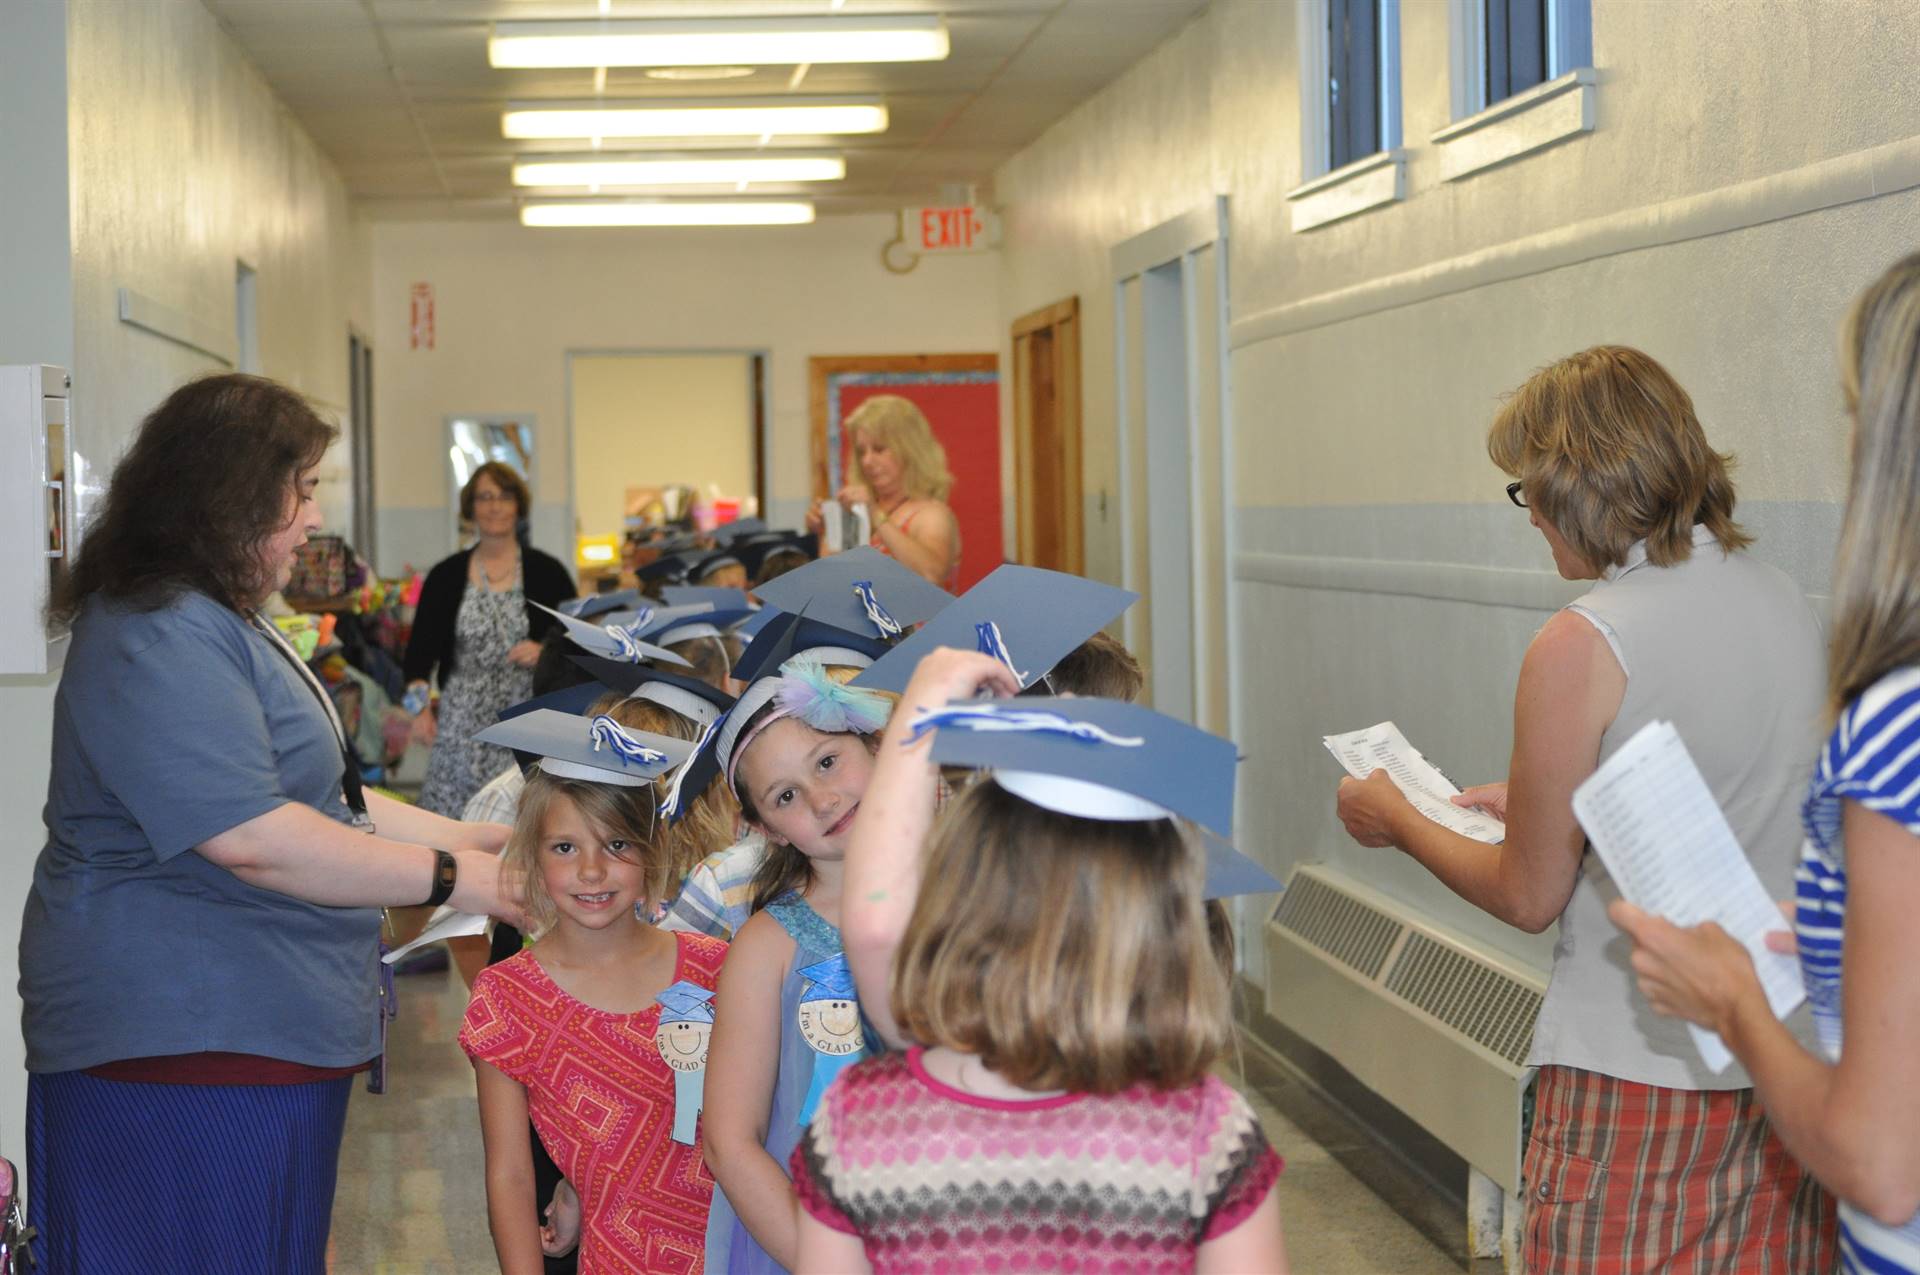 Teachers get first graders lined up in hallway.